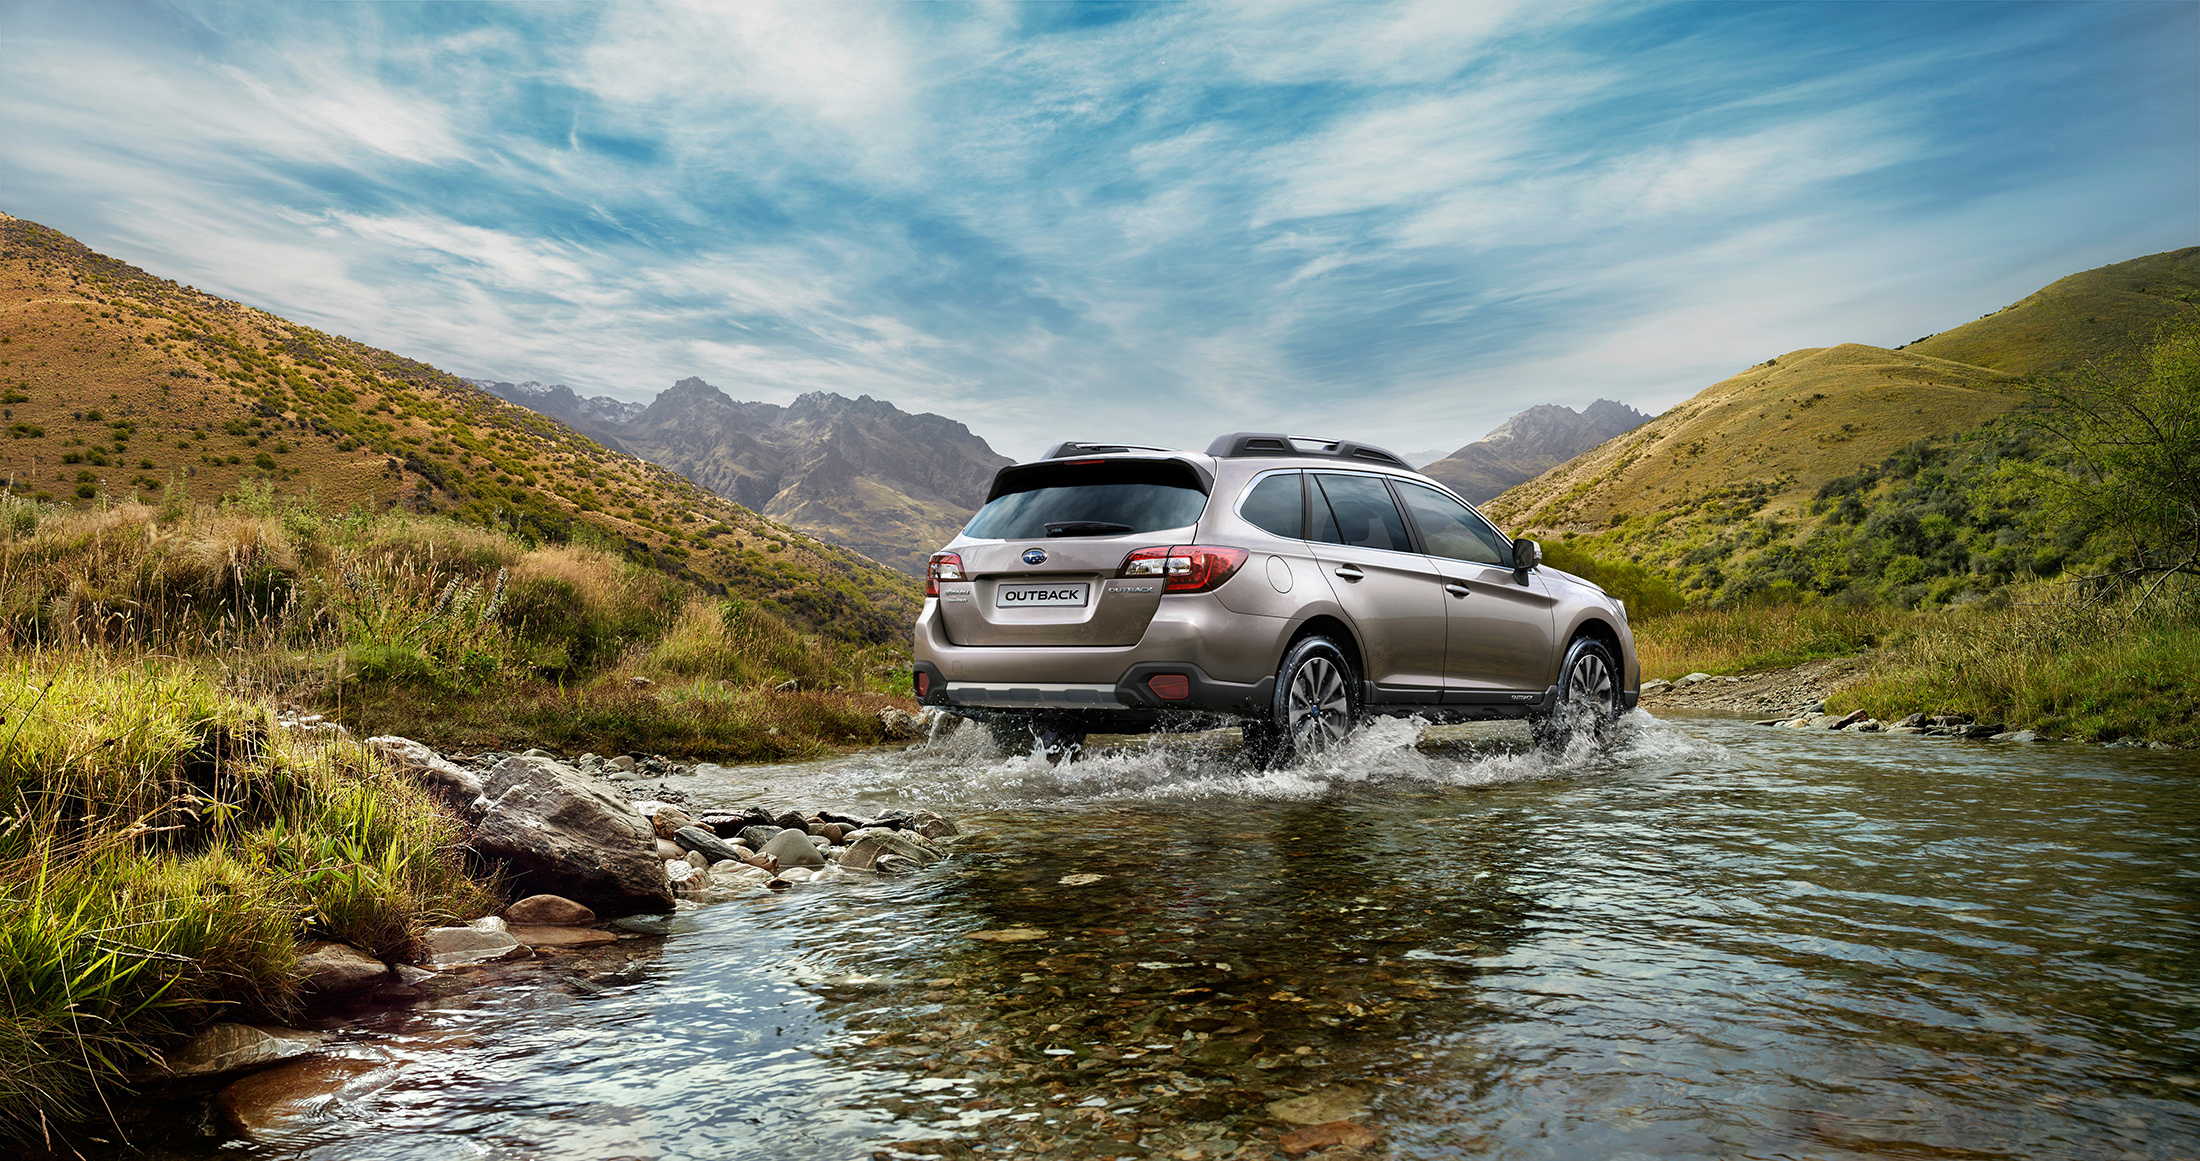 Subaru Outback, High-definition wallpapers, Automotive backgrounds, Top-rated, 2200x1170 HD Desktop